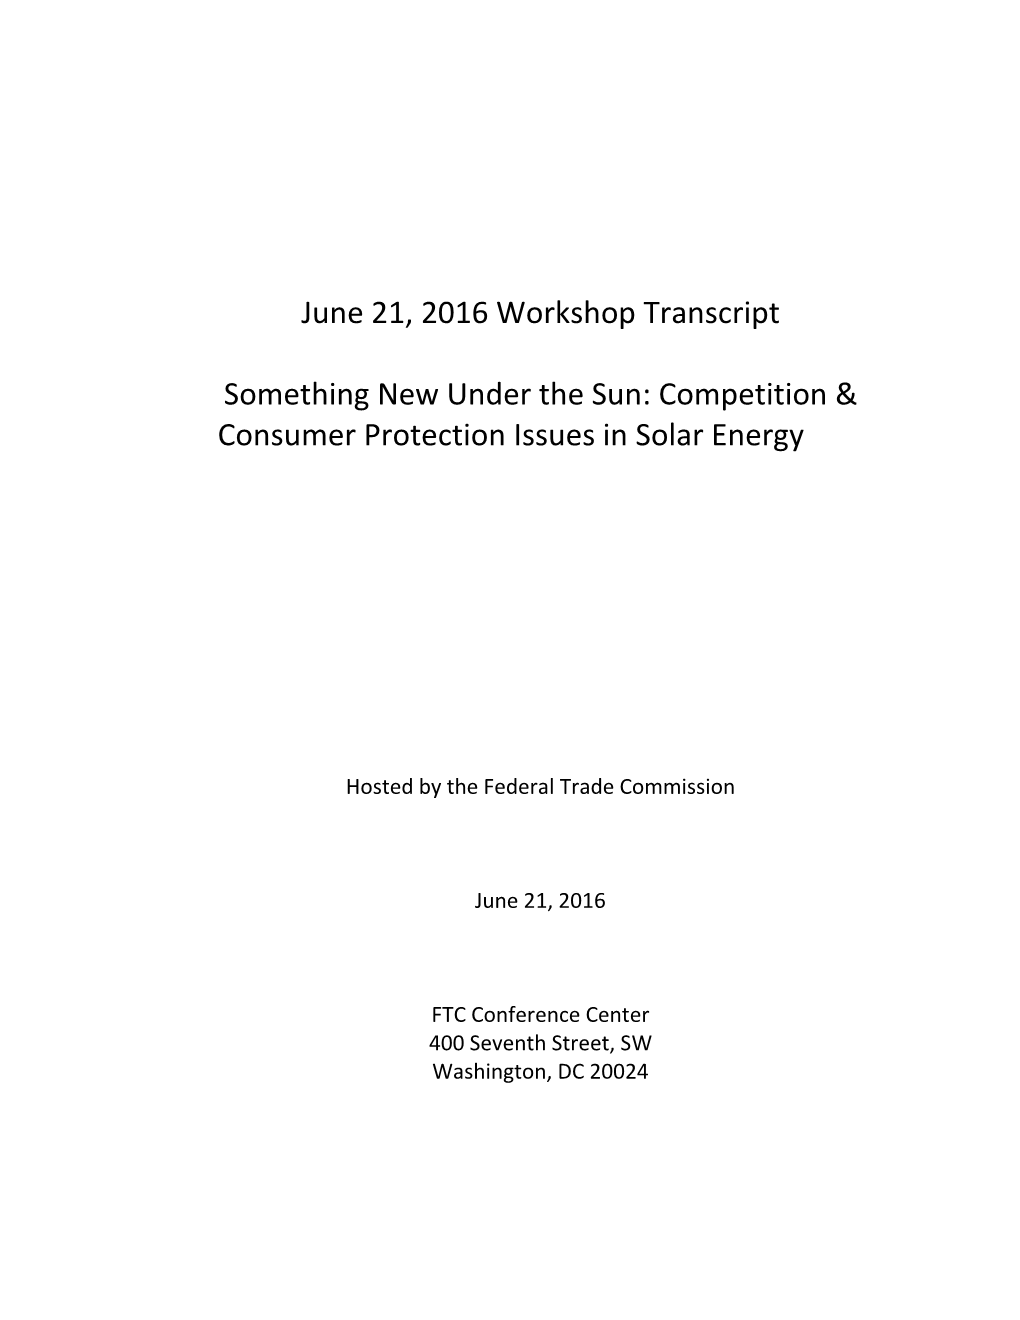 Competition and Consumer Protection Issues in Solar Energy